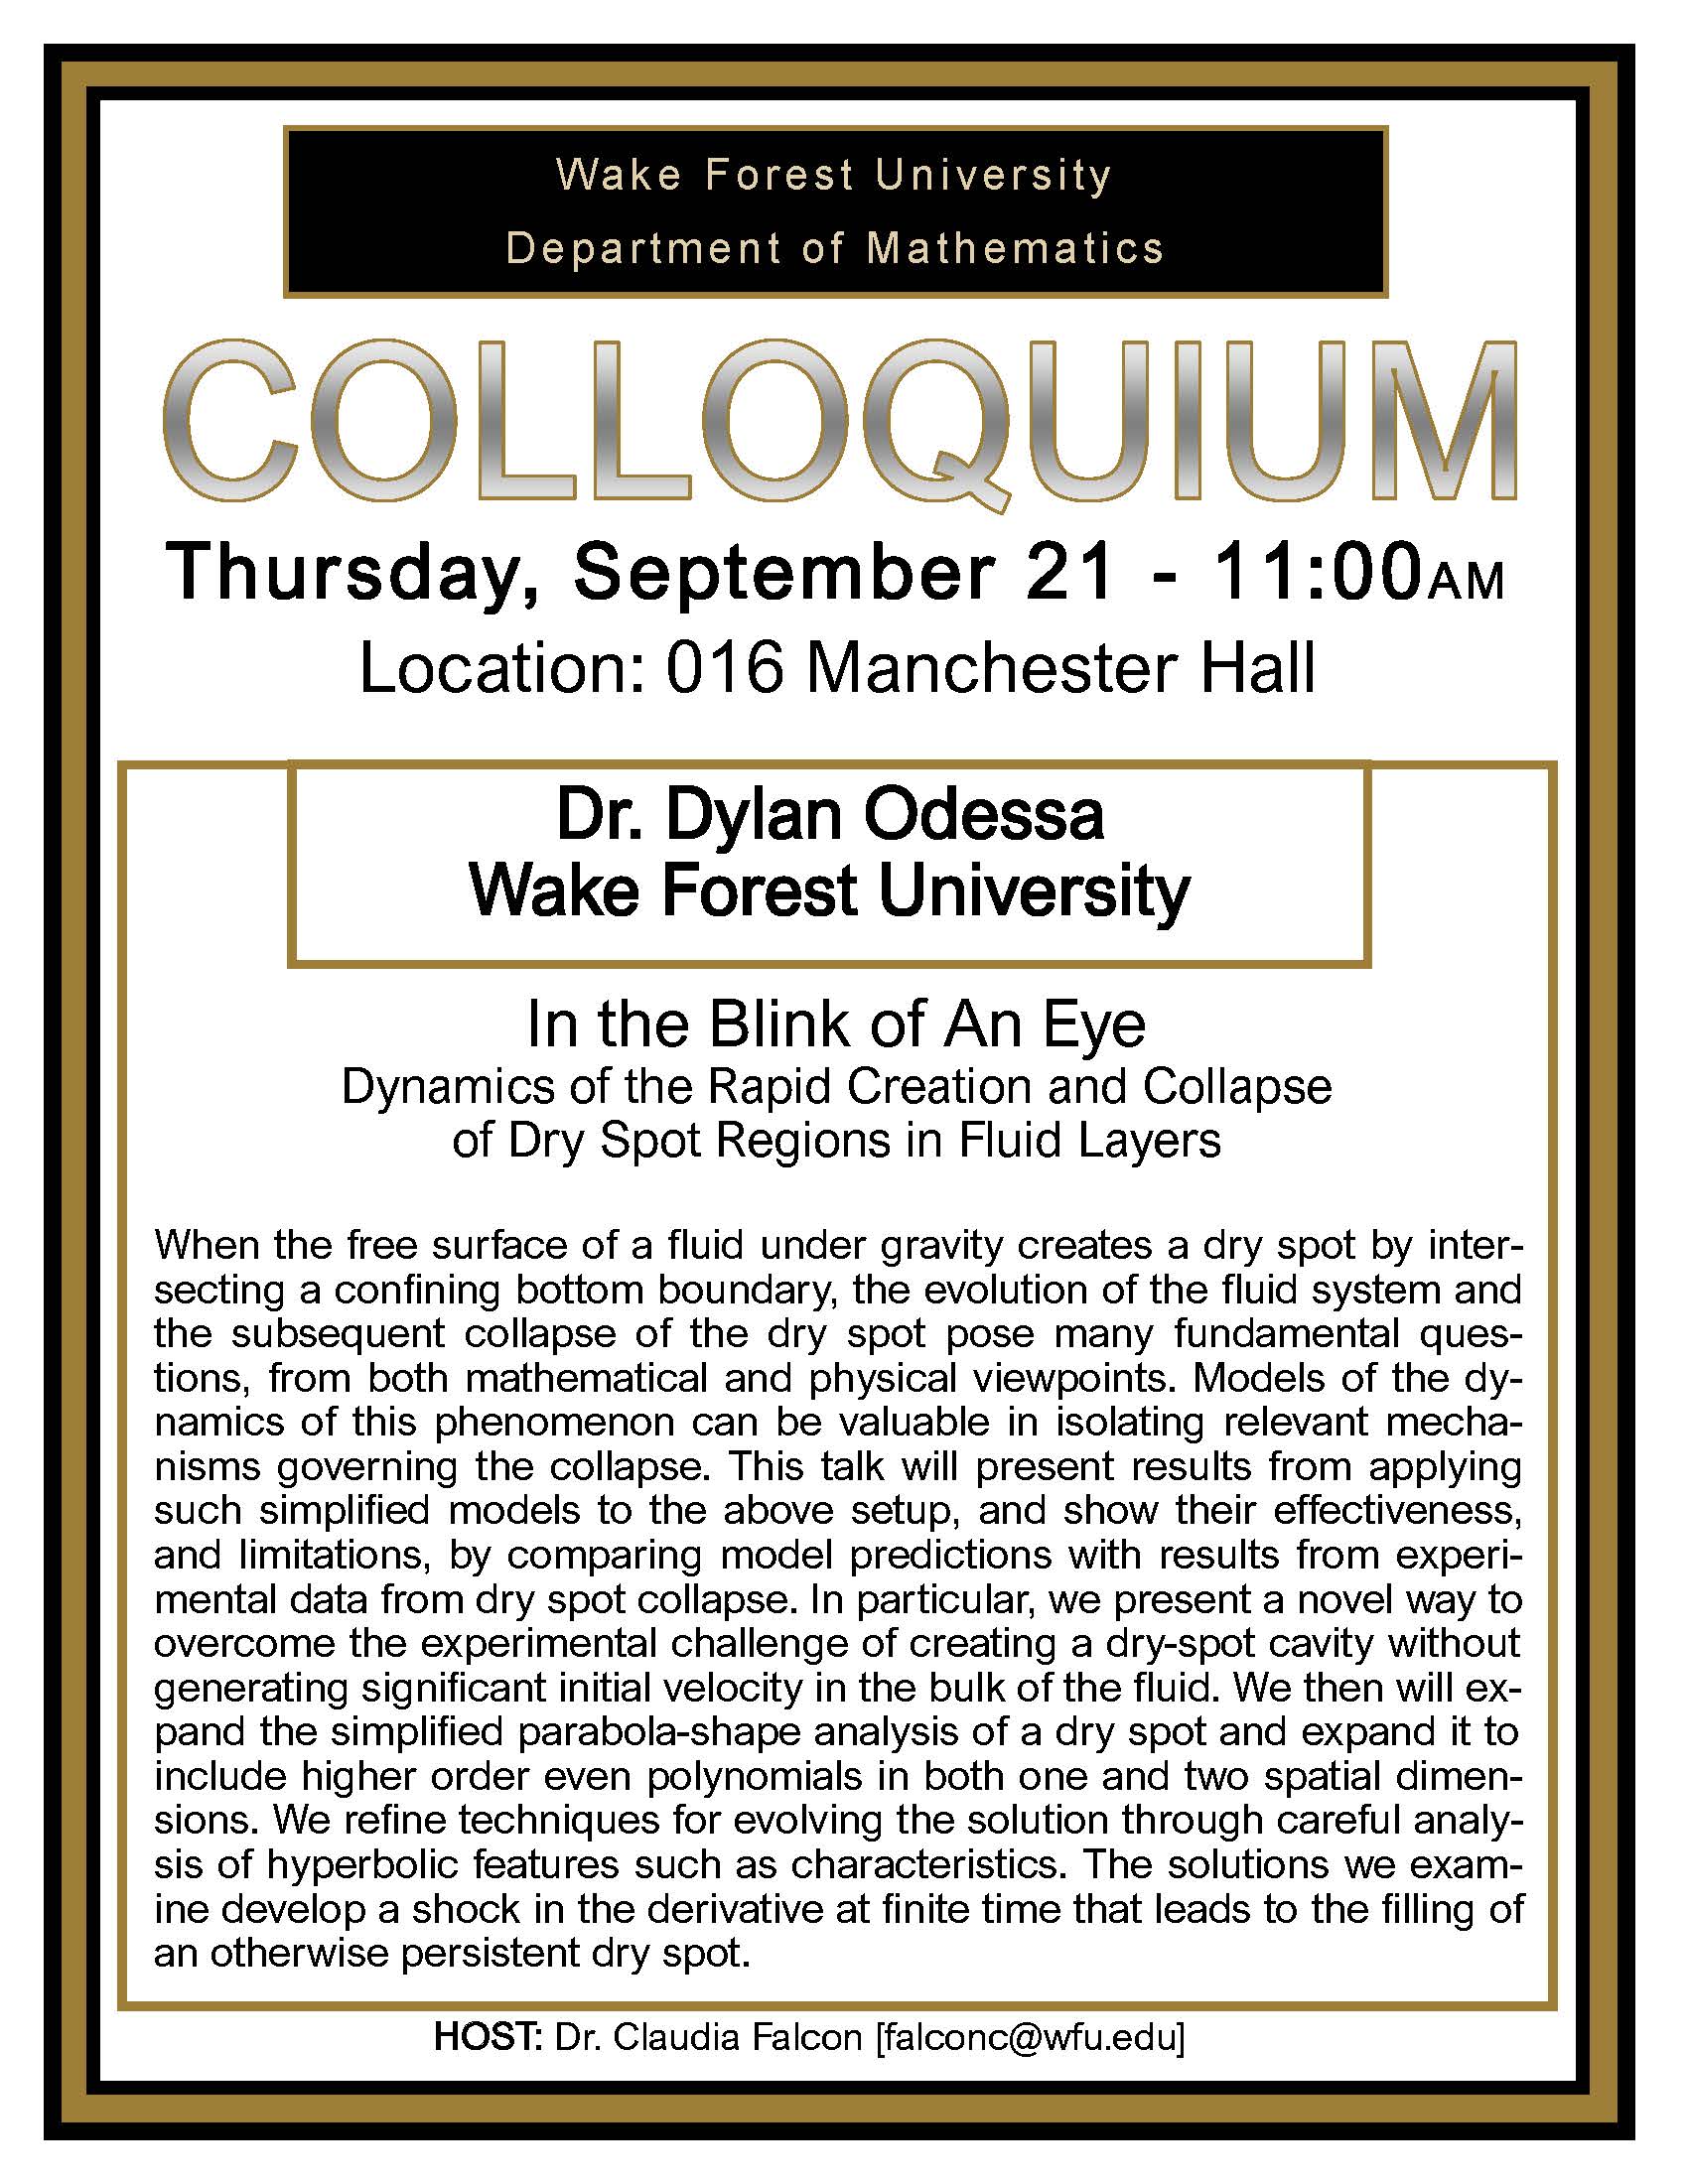 Colloquium: In the Blink of An Eye